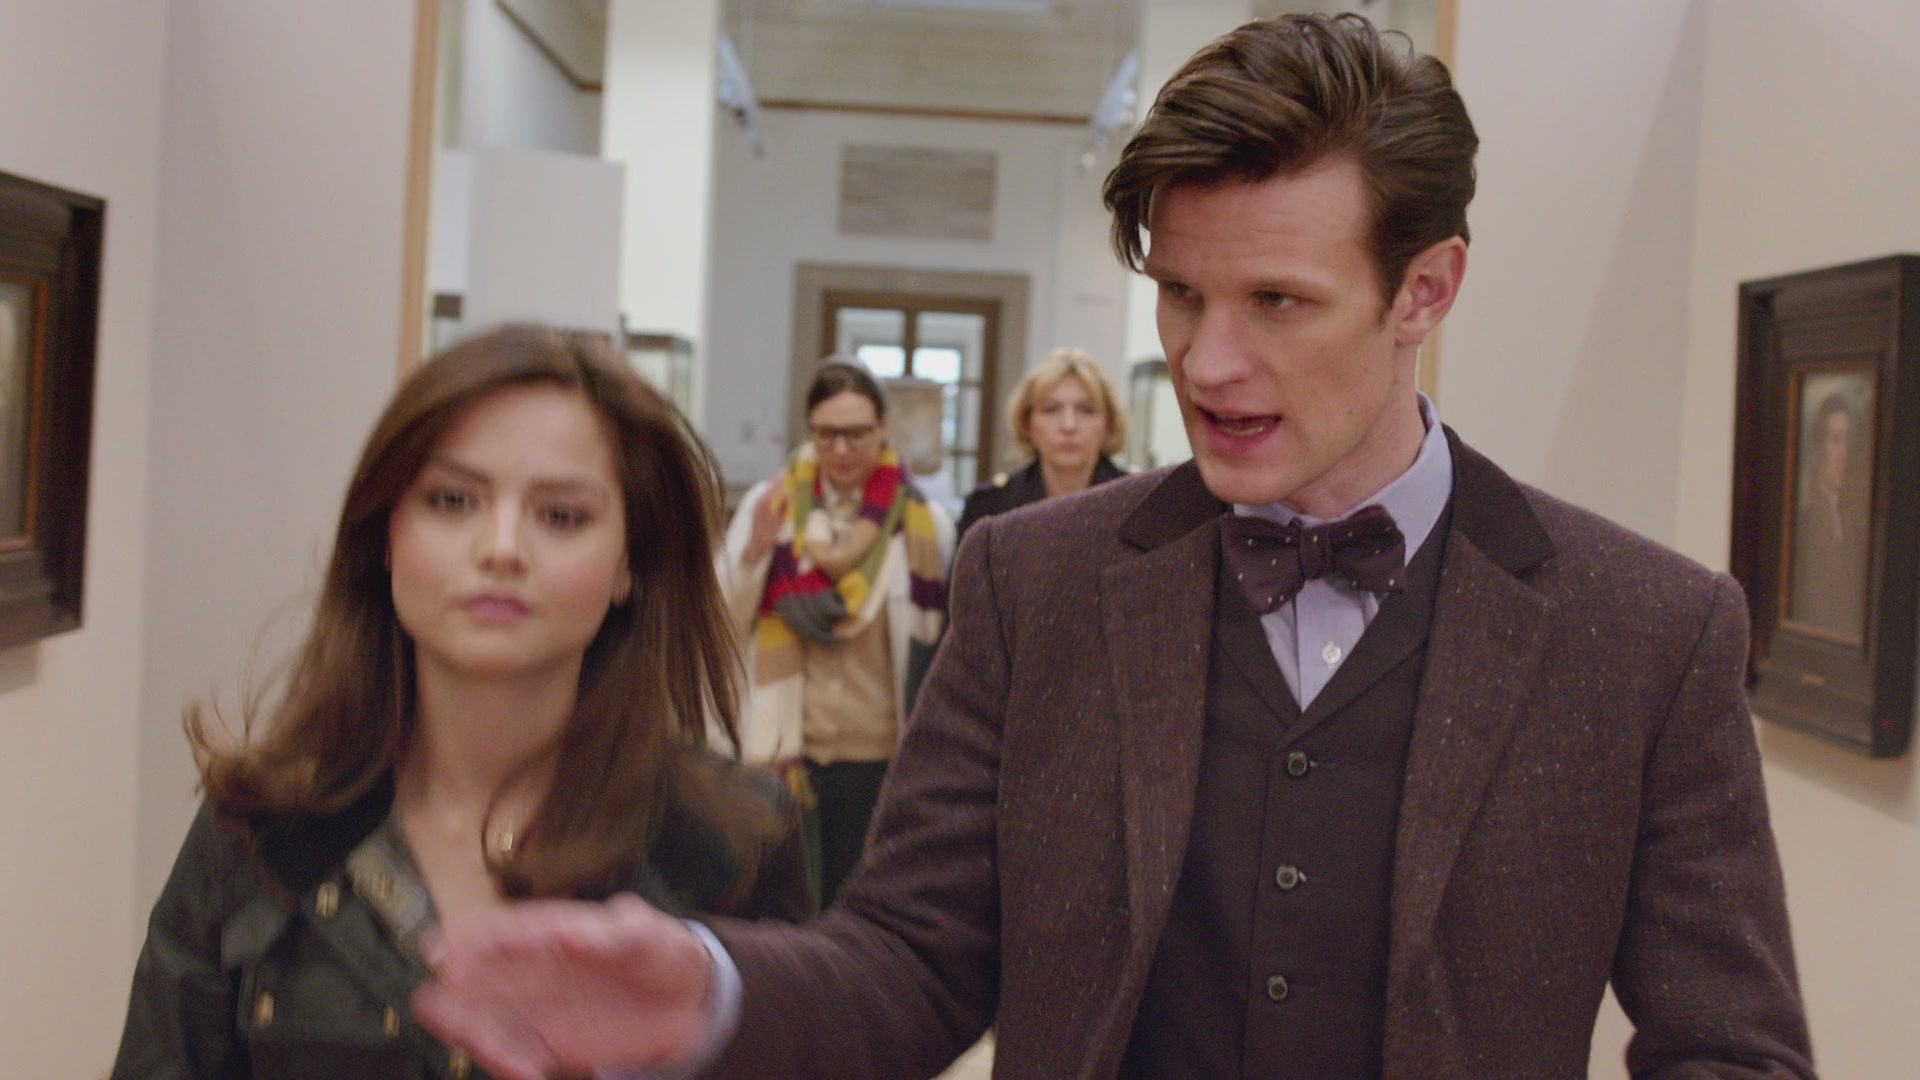 DayOfTheDoctor-Caps-0163.jpg